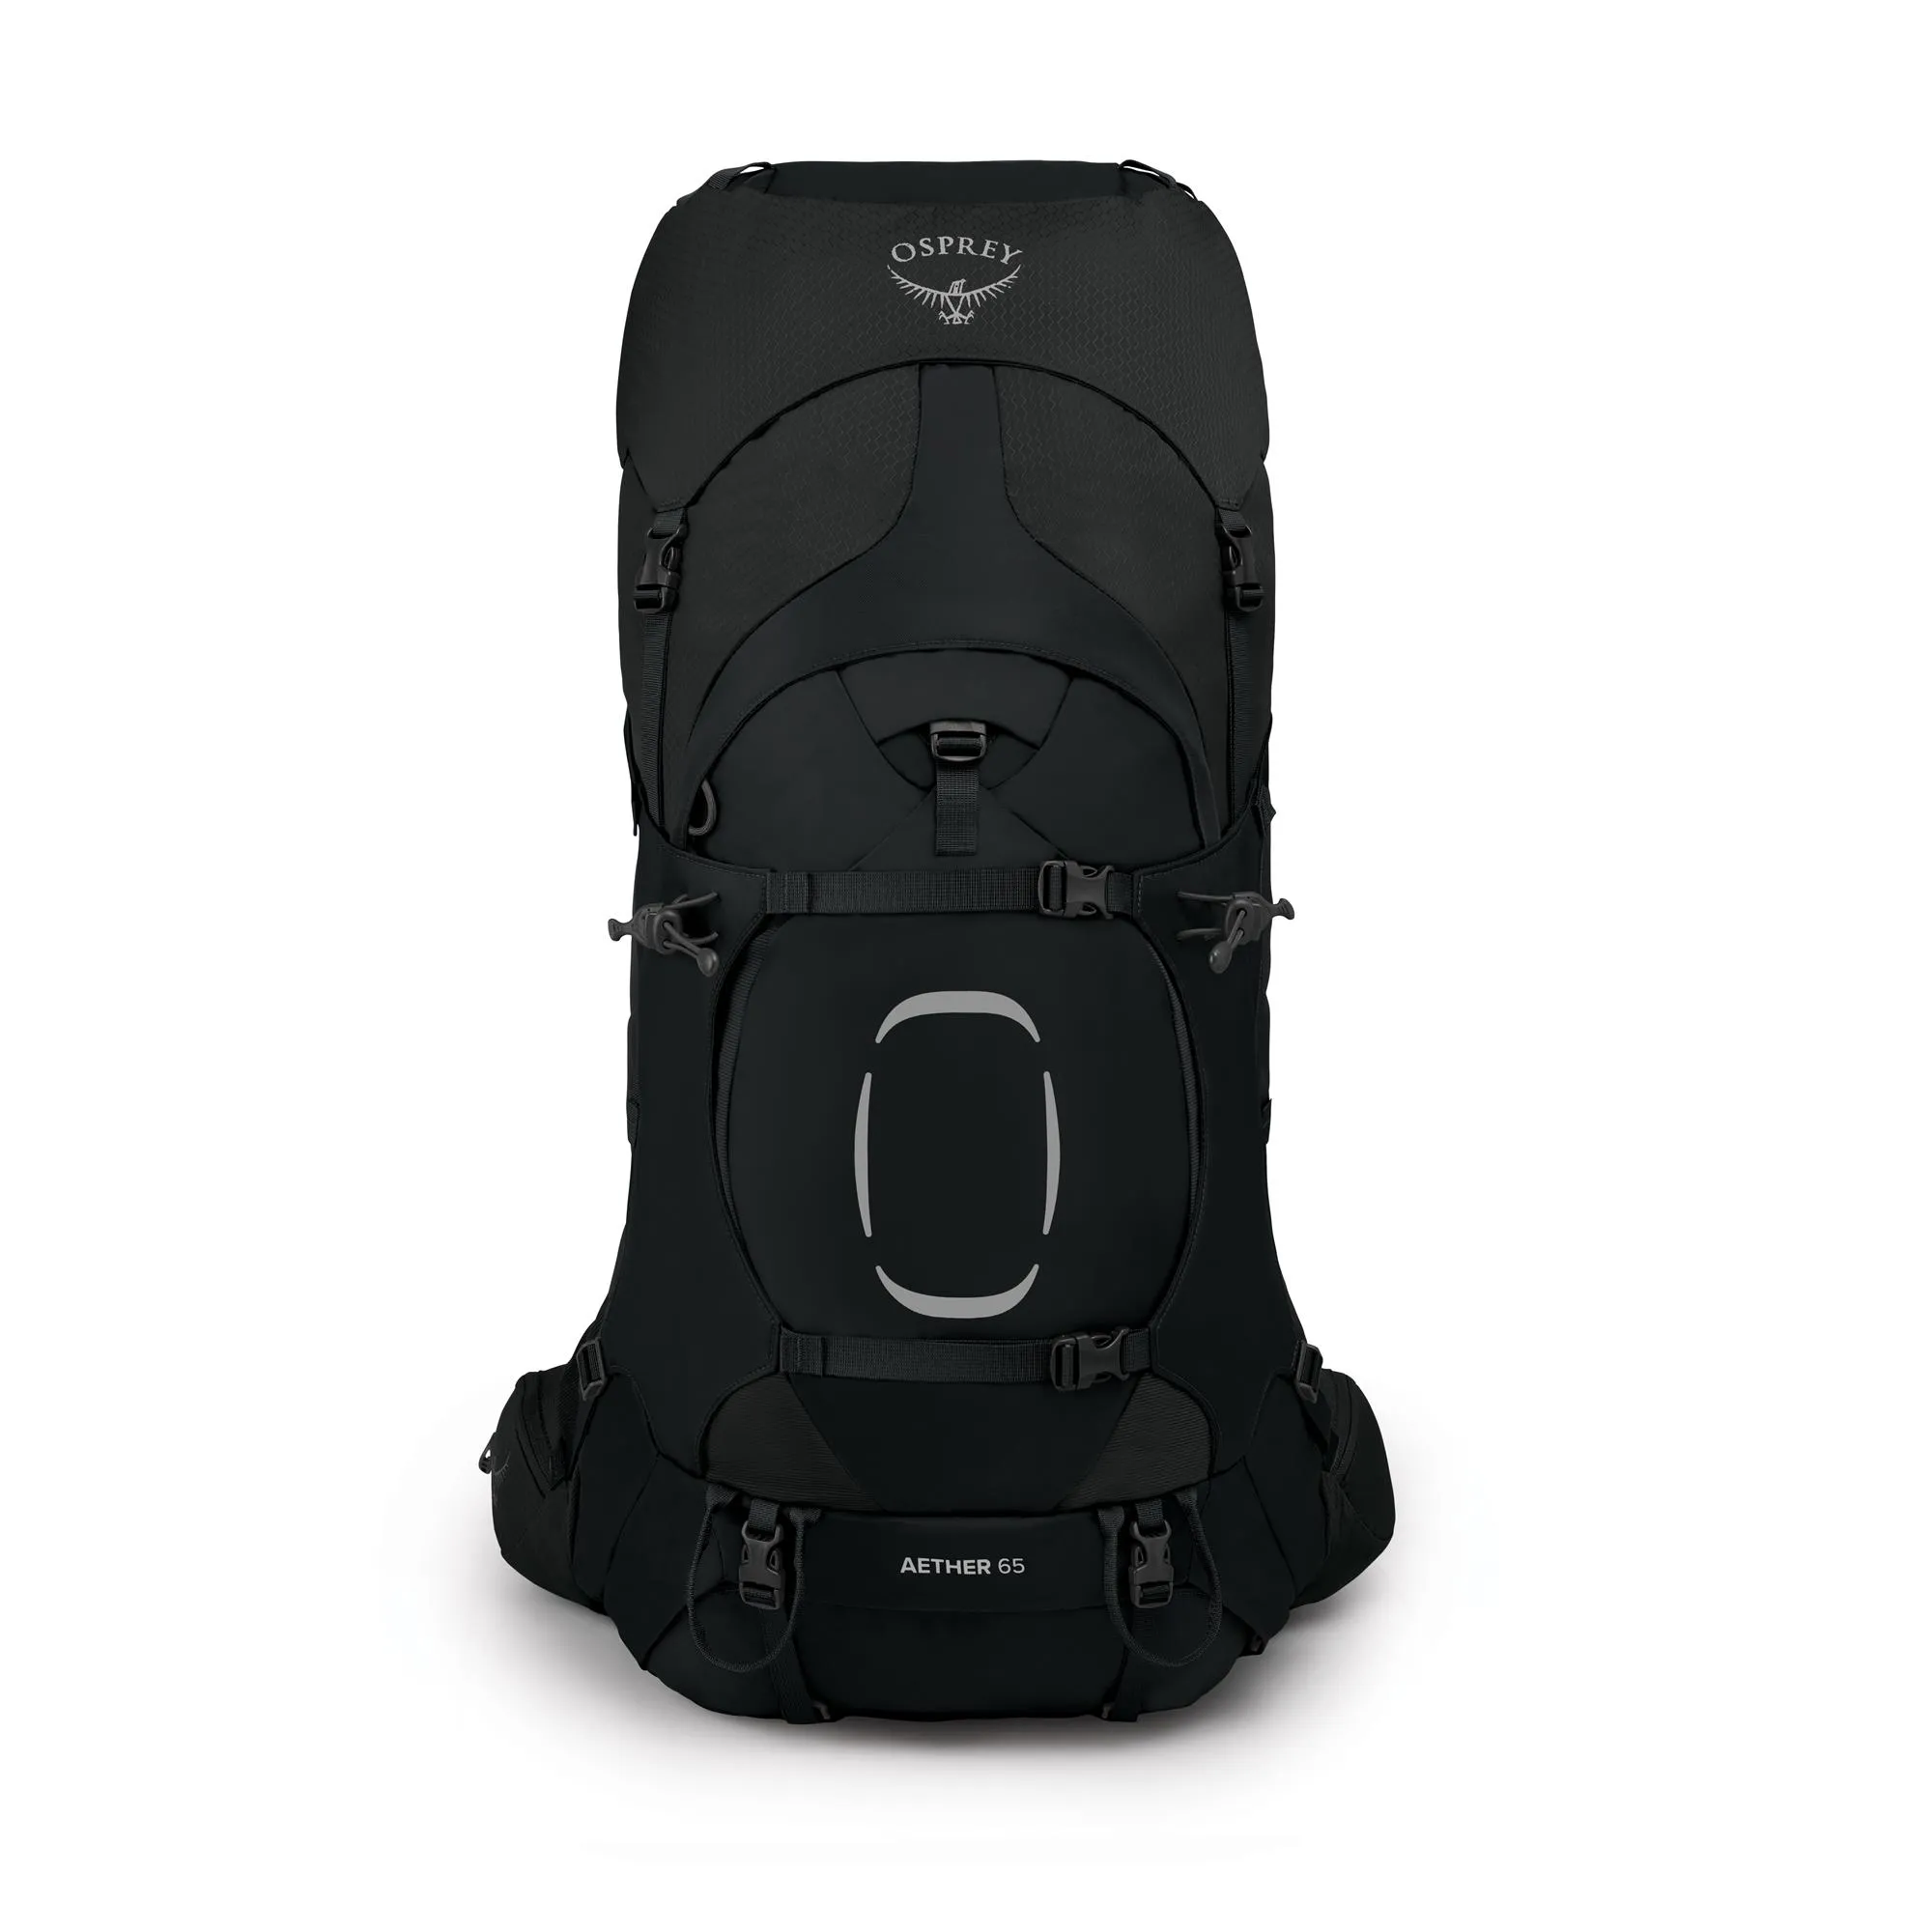 Aether_65_S21_Front_Black.jpg